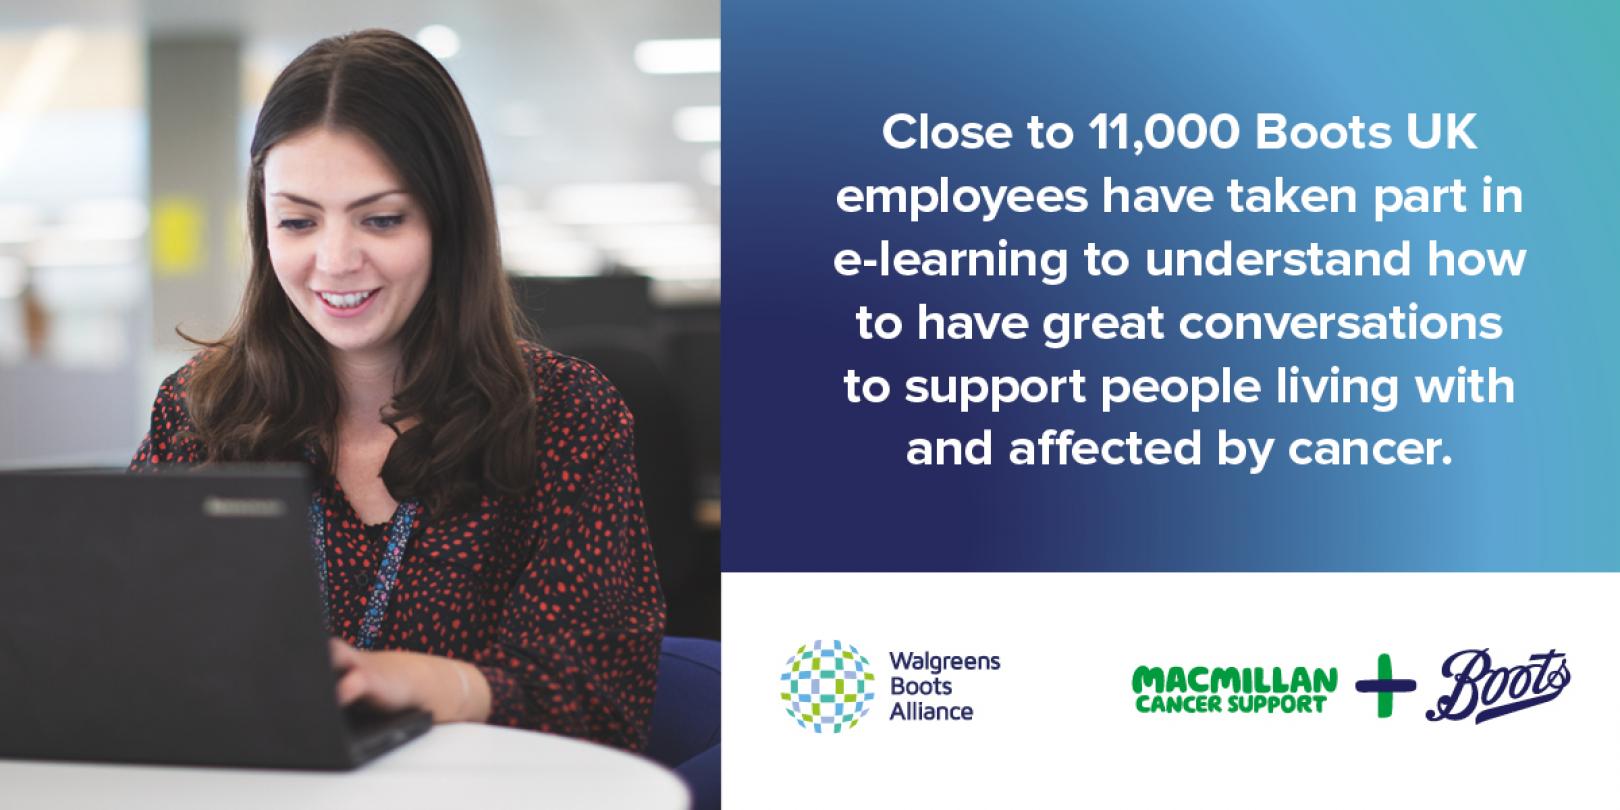 Boots UK & Macmillan Cancer Support help 11,000 employees take e-learning for cancer conversations Twitter LinkedIn